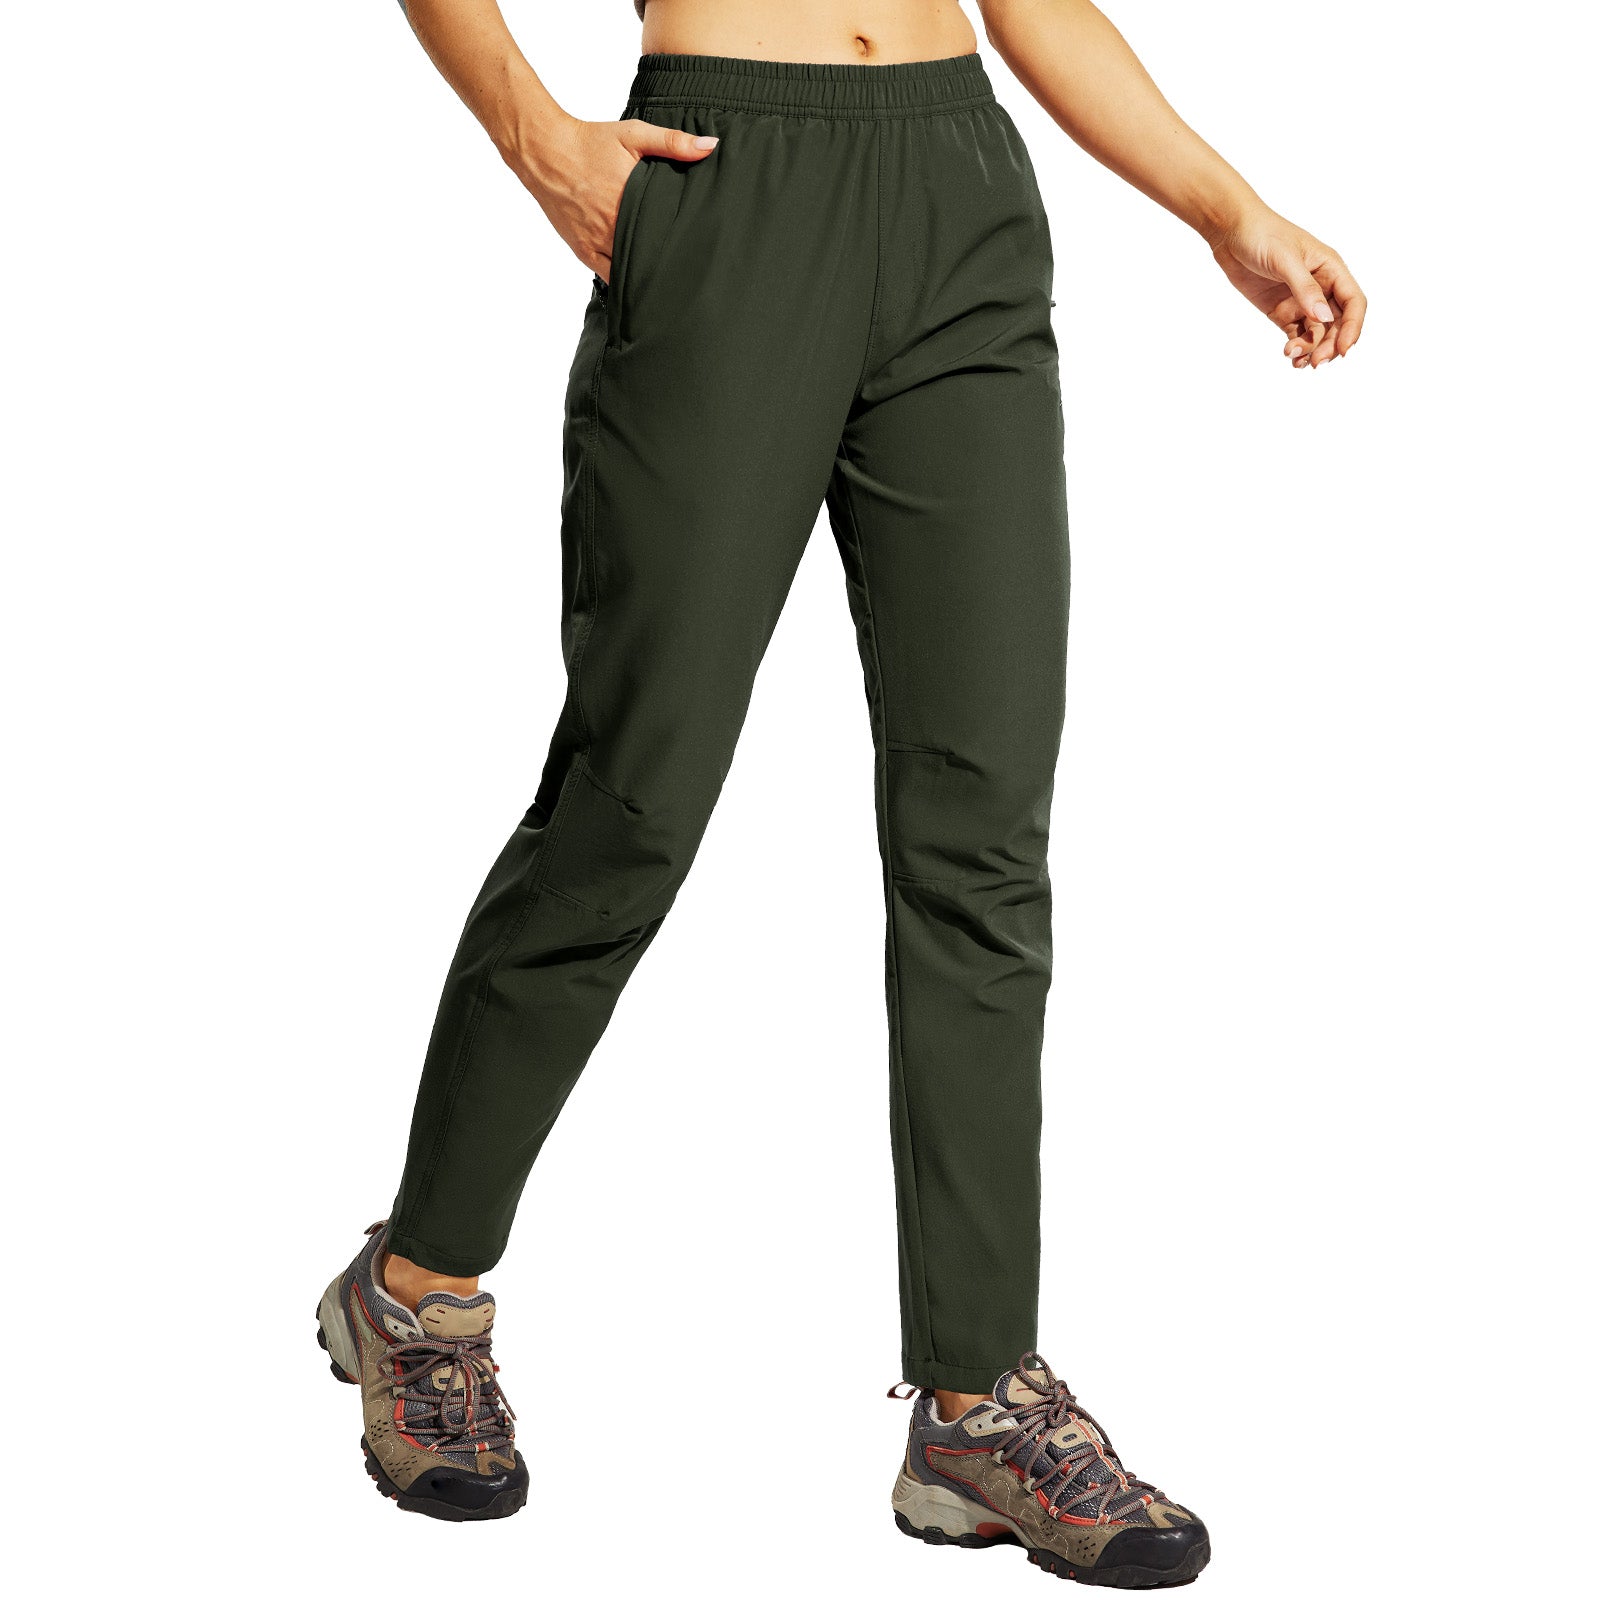  Haimont Women's Insulated Hiking Pants Windproof